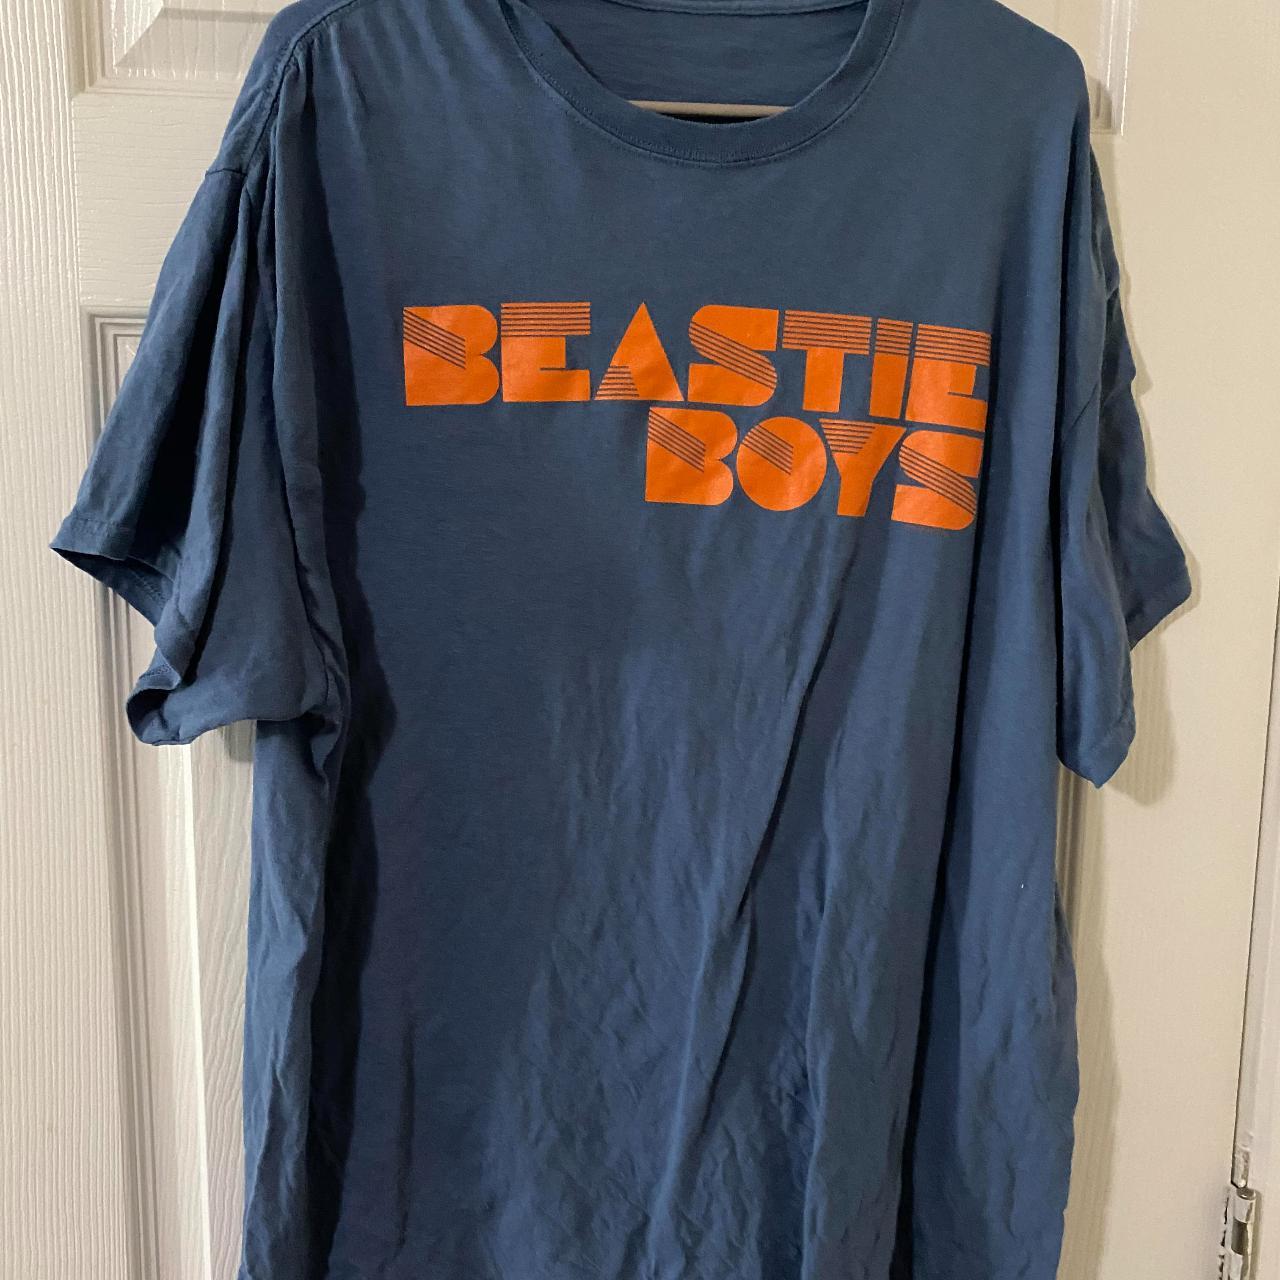 Product Image 1 - Beastie Boys Graphic T-Shirt
Mens Size